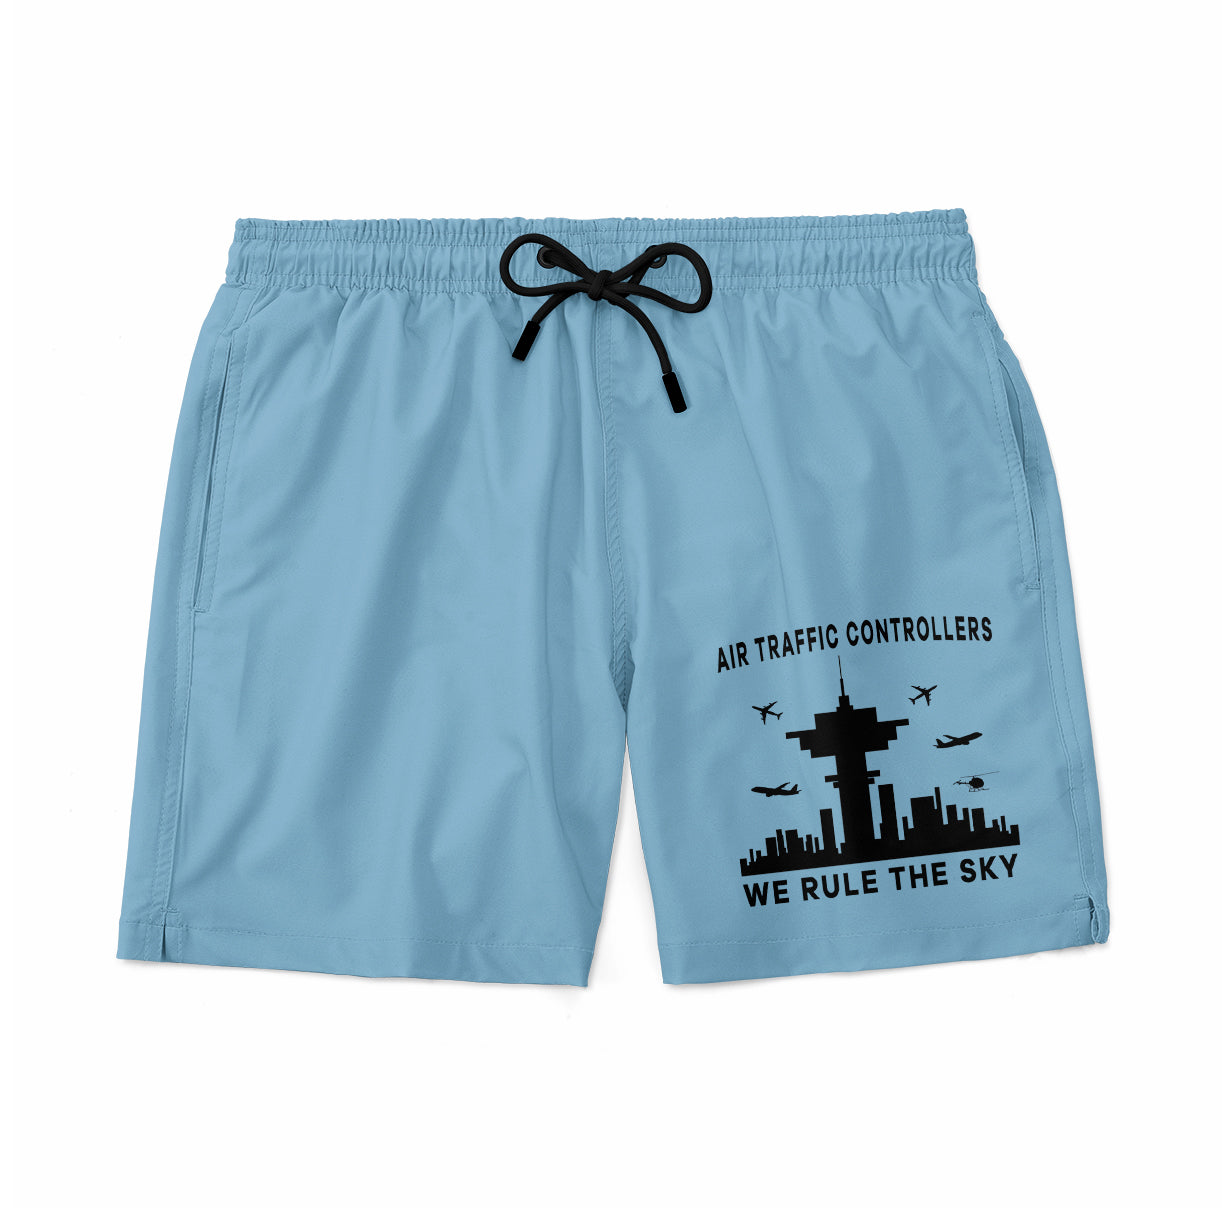 Air Traffic Controllers - We Rule The Sky Designed Swim Trunks & Shorts